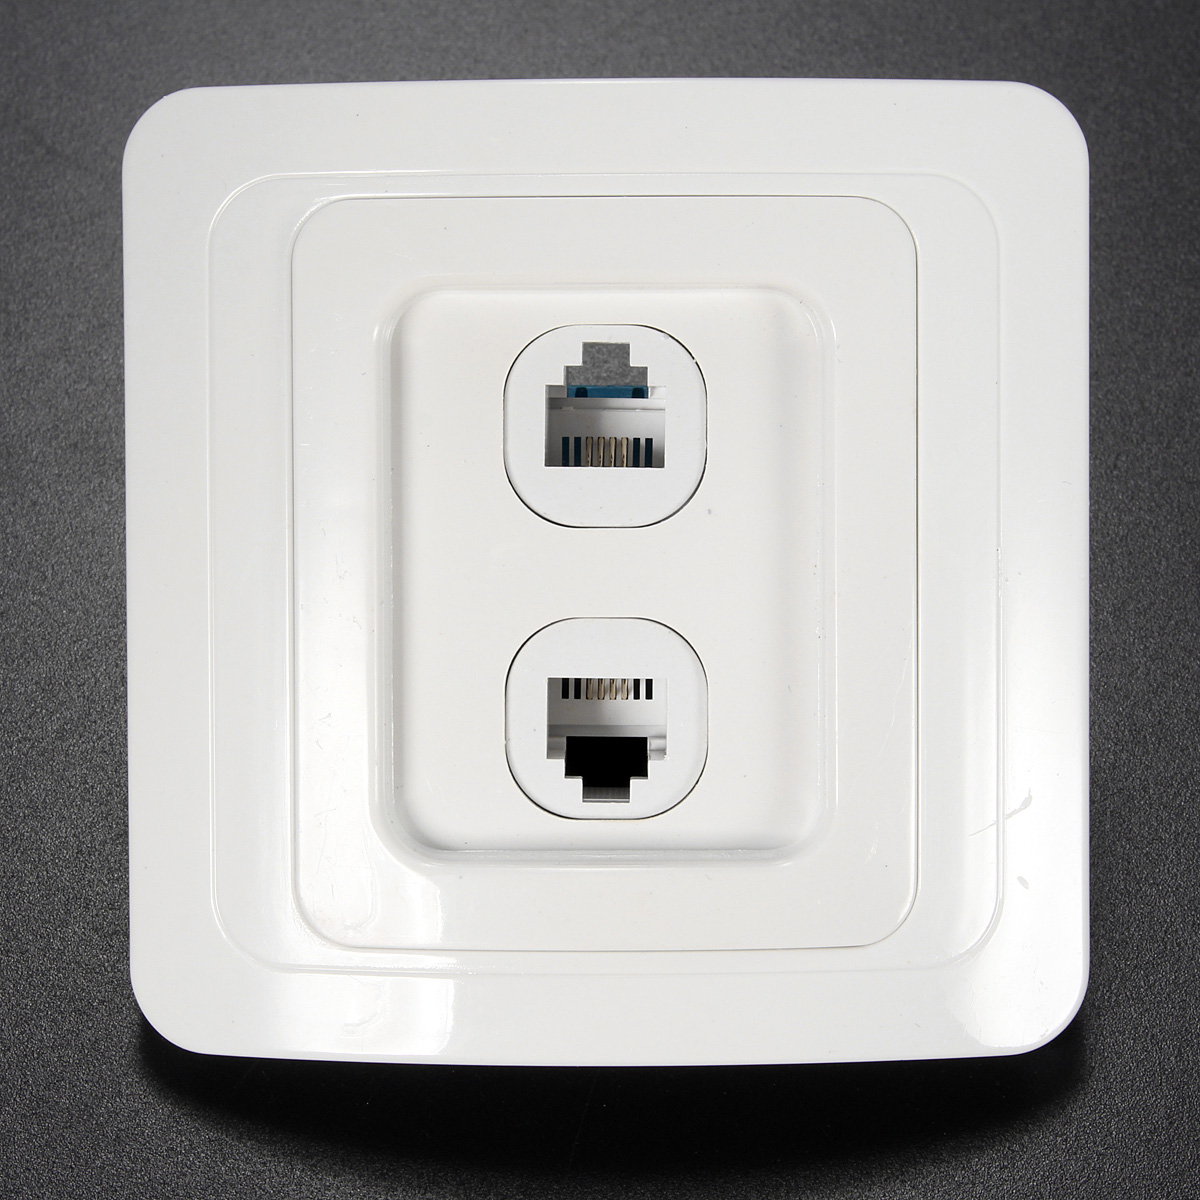 RJ11-Electric-Wall-Station-Socket-Telephone-Phone-Dual-Outlet-Panel-Face-Plate-Socket-Connector-1399685-4